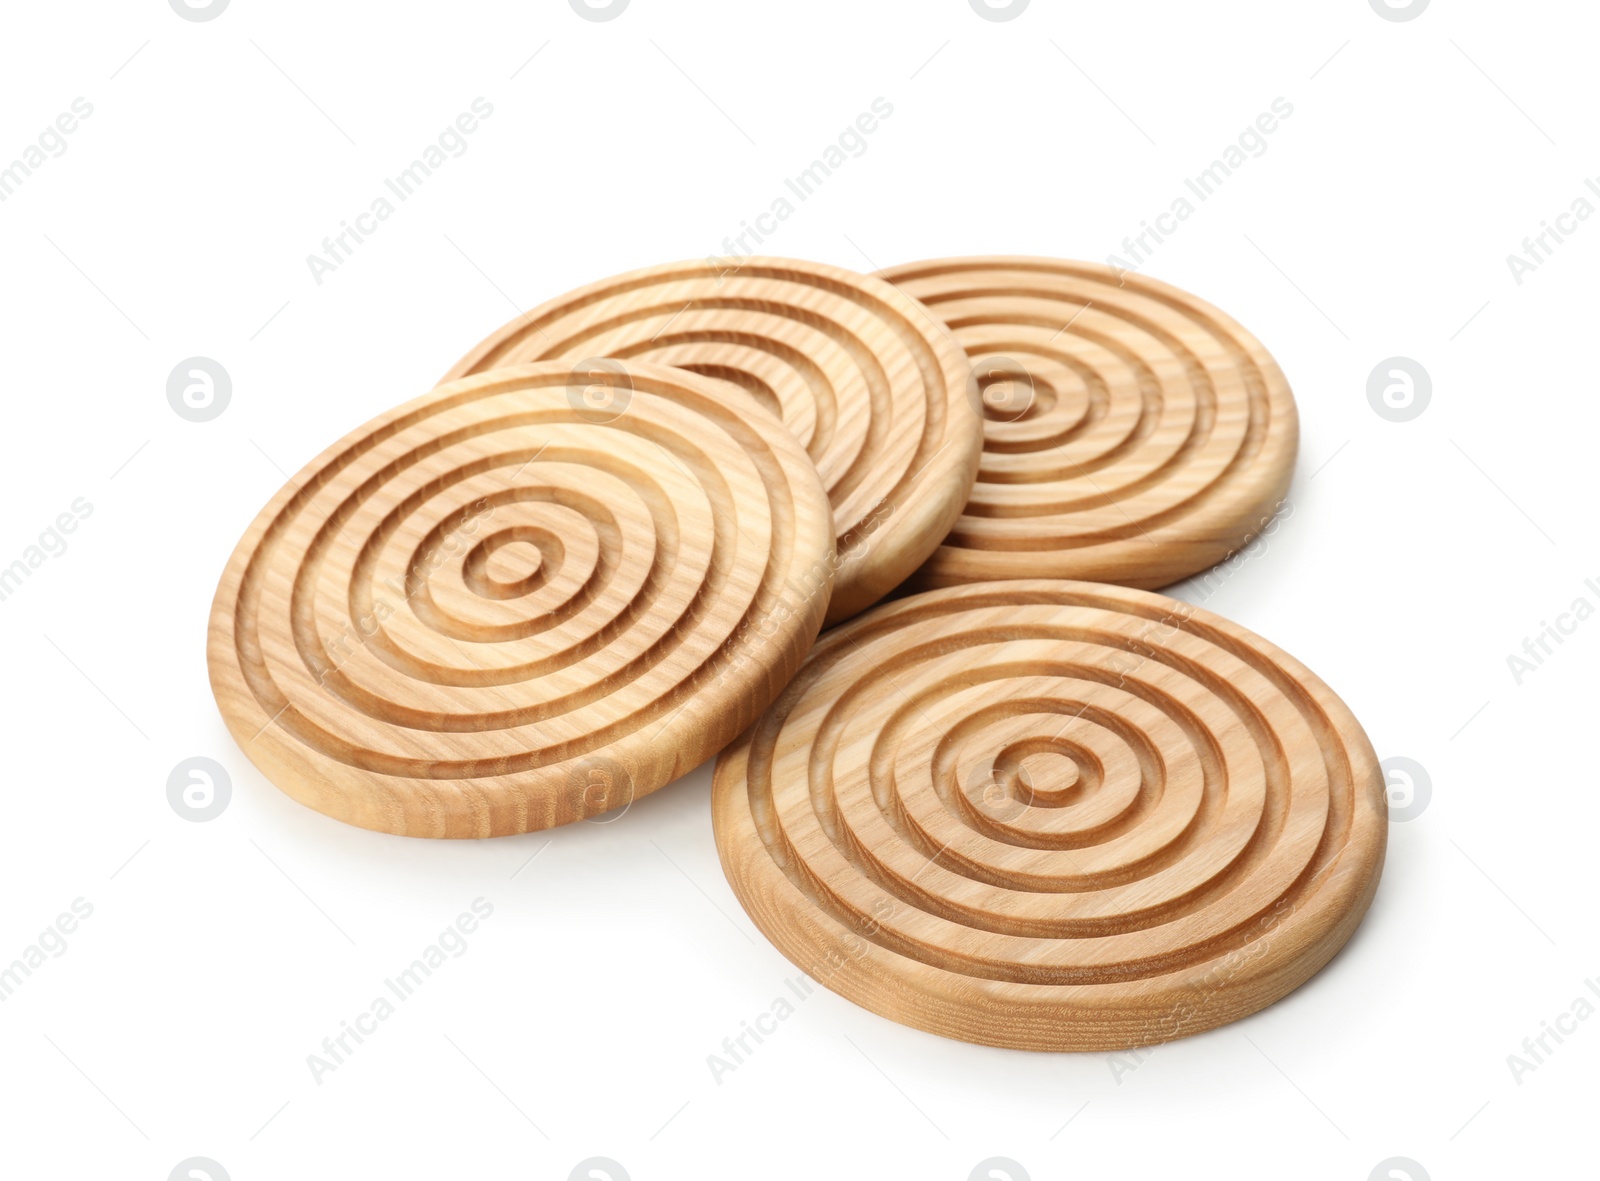 Photo of Stylish wooden cup coasters on white background